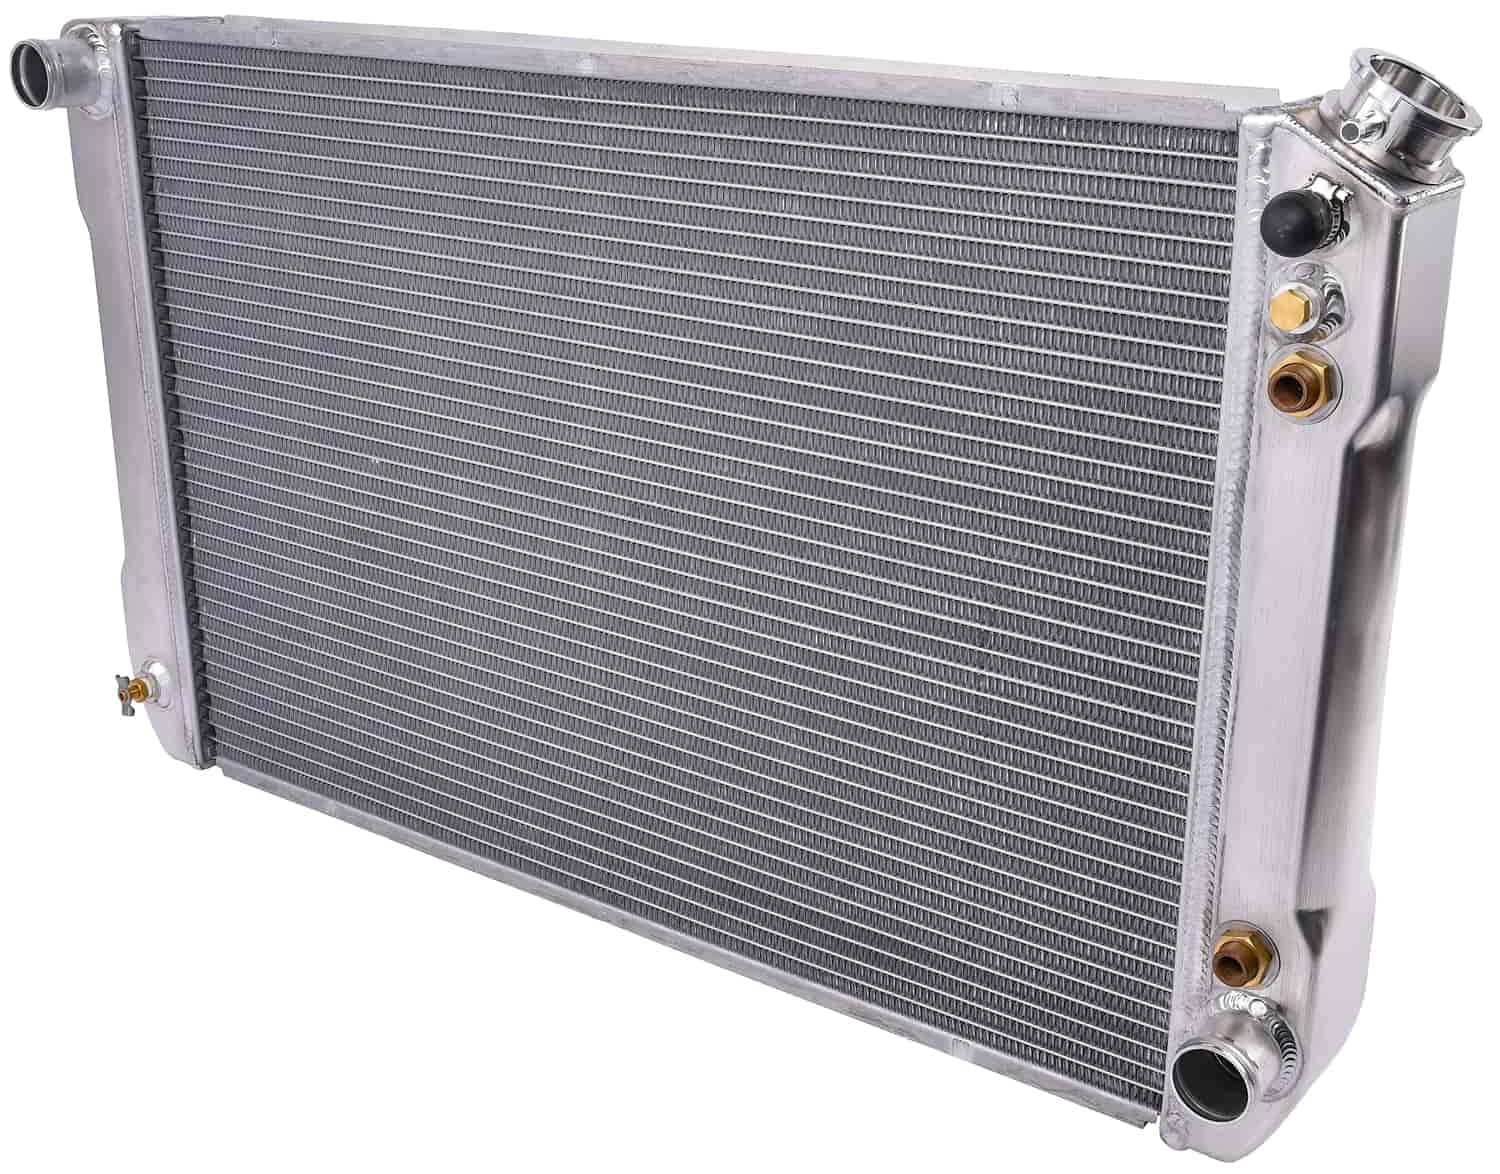 Ready Fit Aluminum Radiator for Big Block Chevy